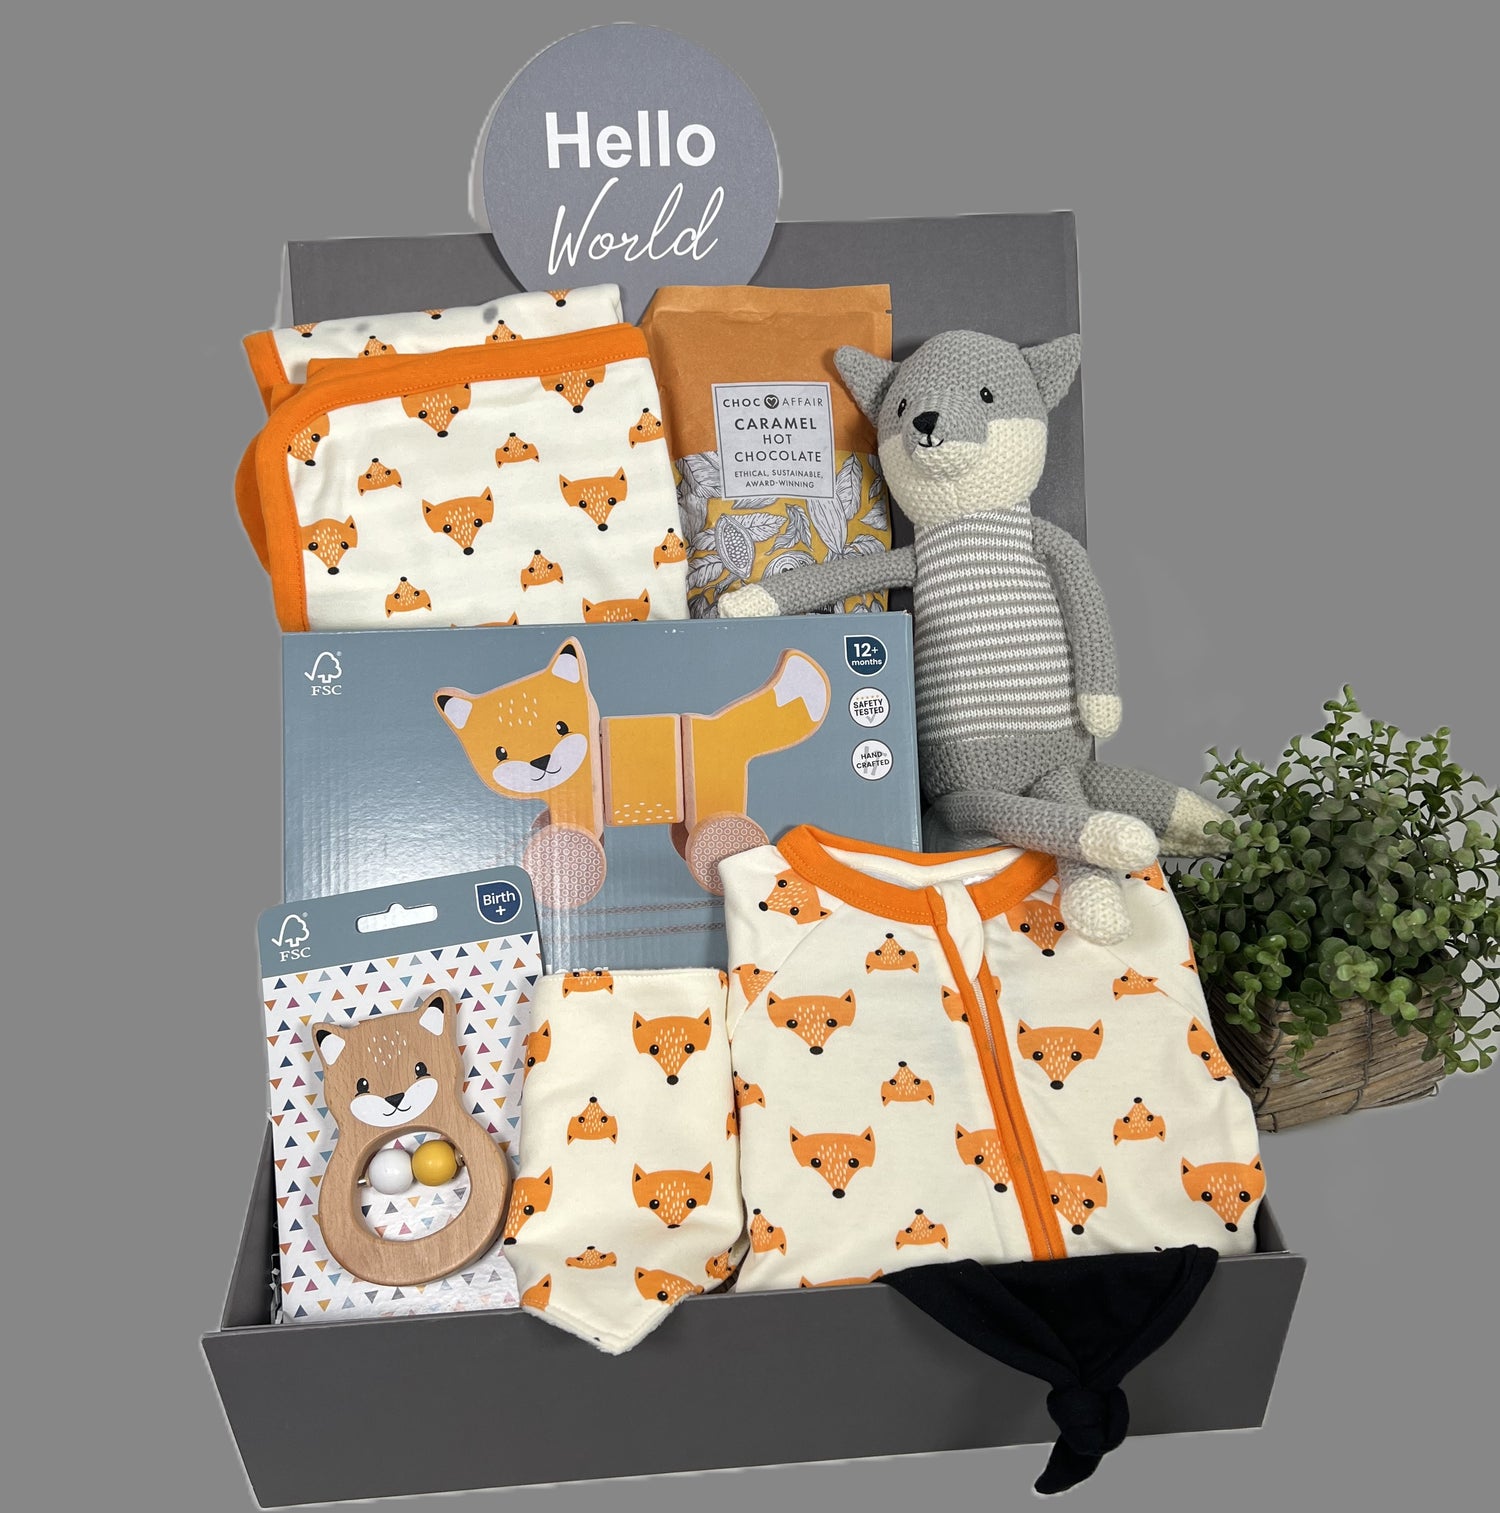 neutral new baby gift fox themed baby hamper with cotton zipped sleepsuit, matching hooded baby blanket and dribble bib, a fox soft toy, a wooden FSC pull along fox toy, a FSC fox baby rattle, a black baby knot hat and a pack of Choc Affair caramel hot chocolate.